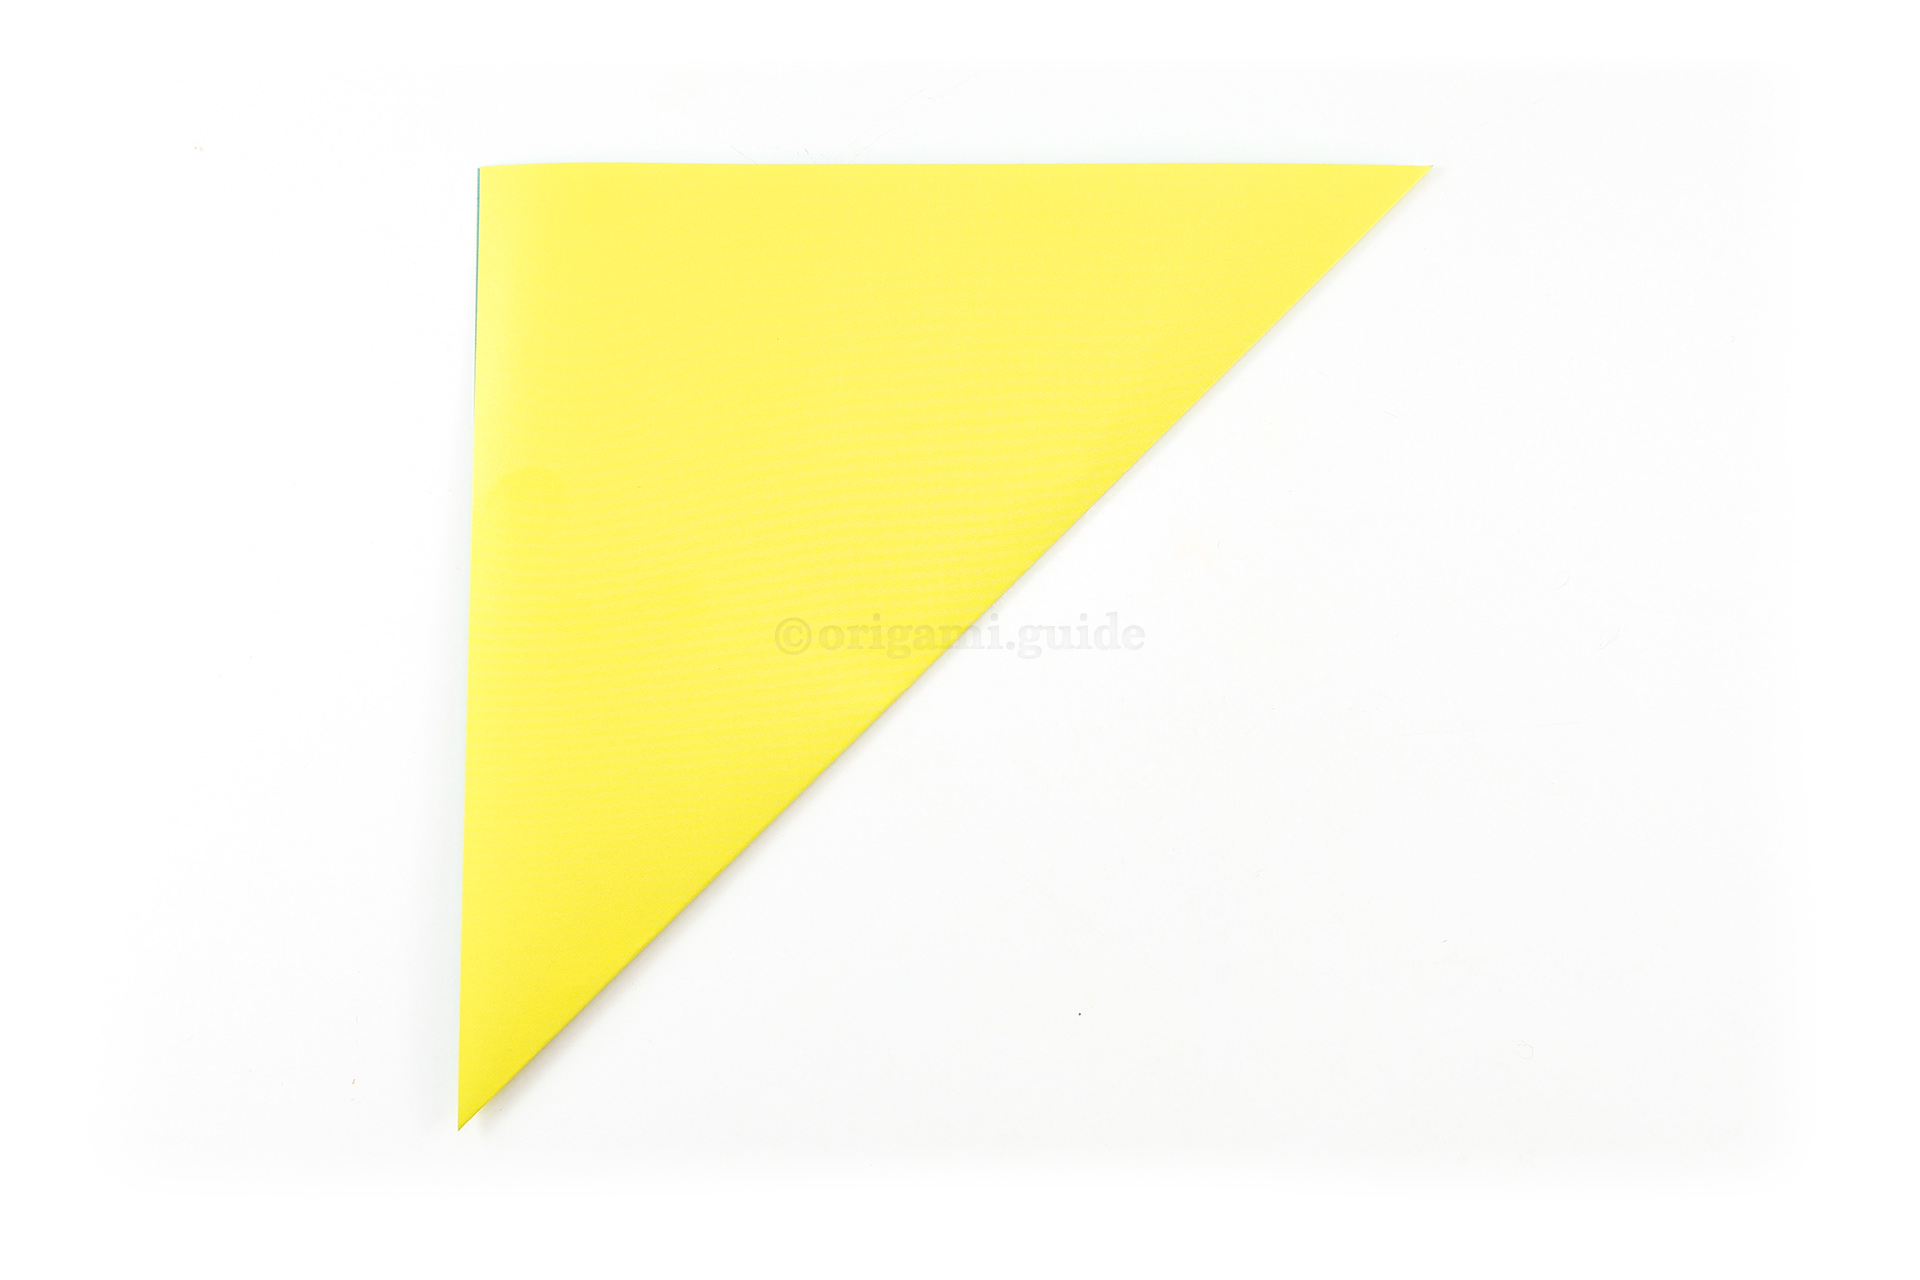 Start by making an origami square base. Fold the bottom right corner diagonally up to the top left corner.